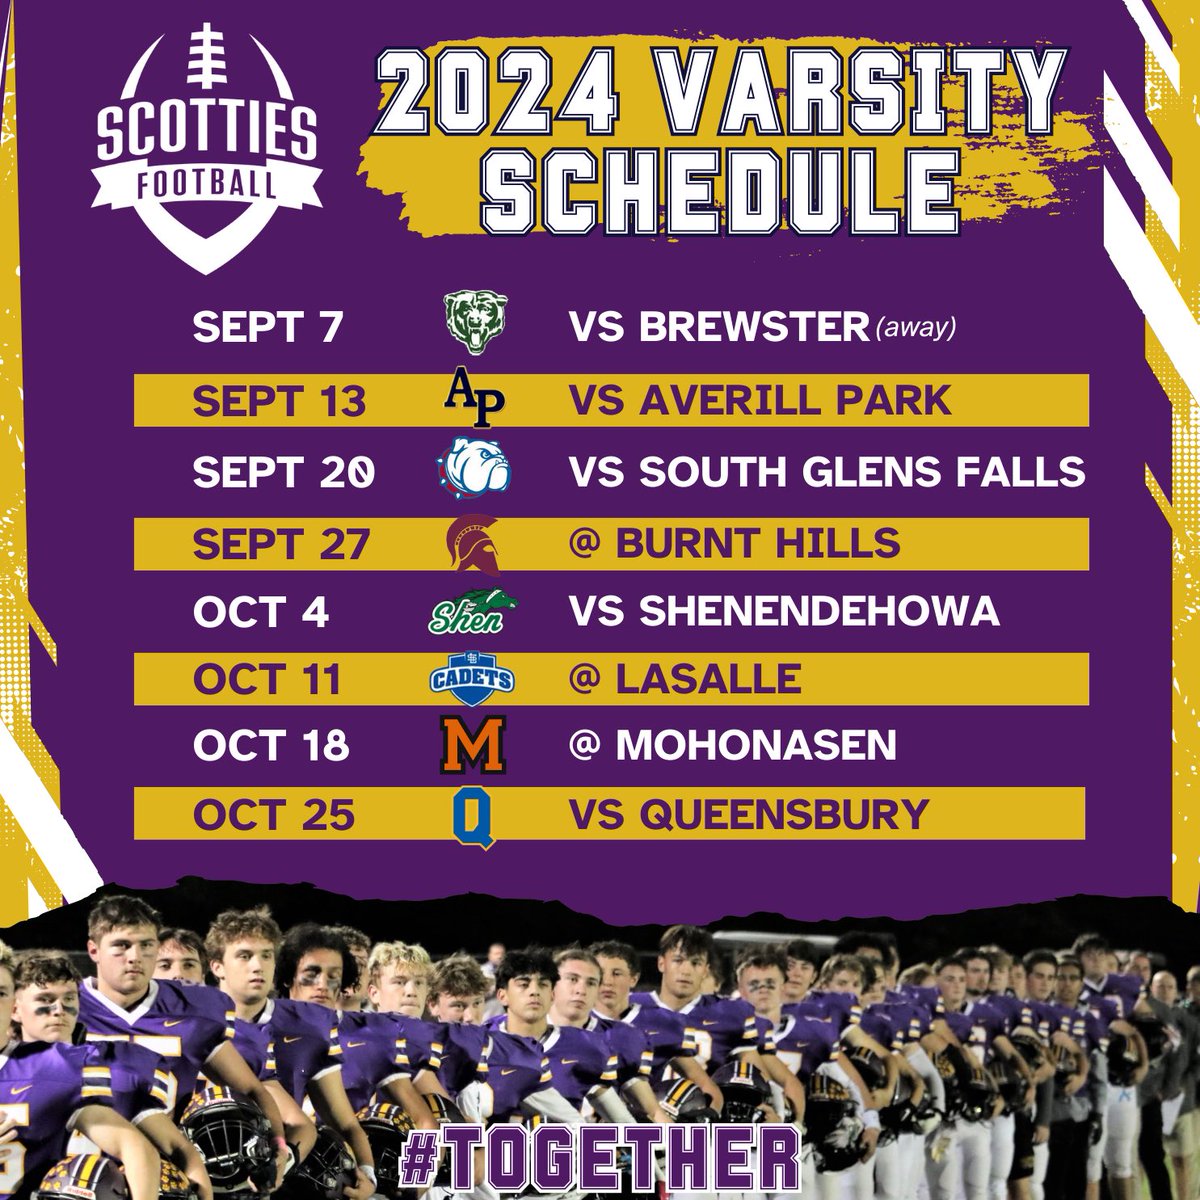 Here we go!!!! Time to get after it boys!! #together 💜🏈💛